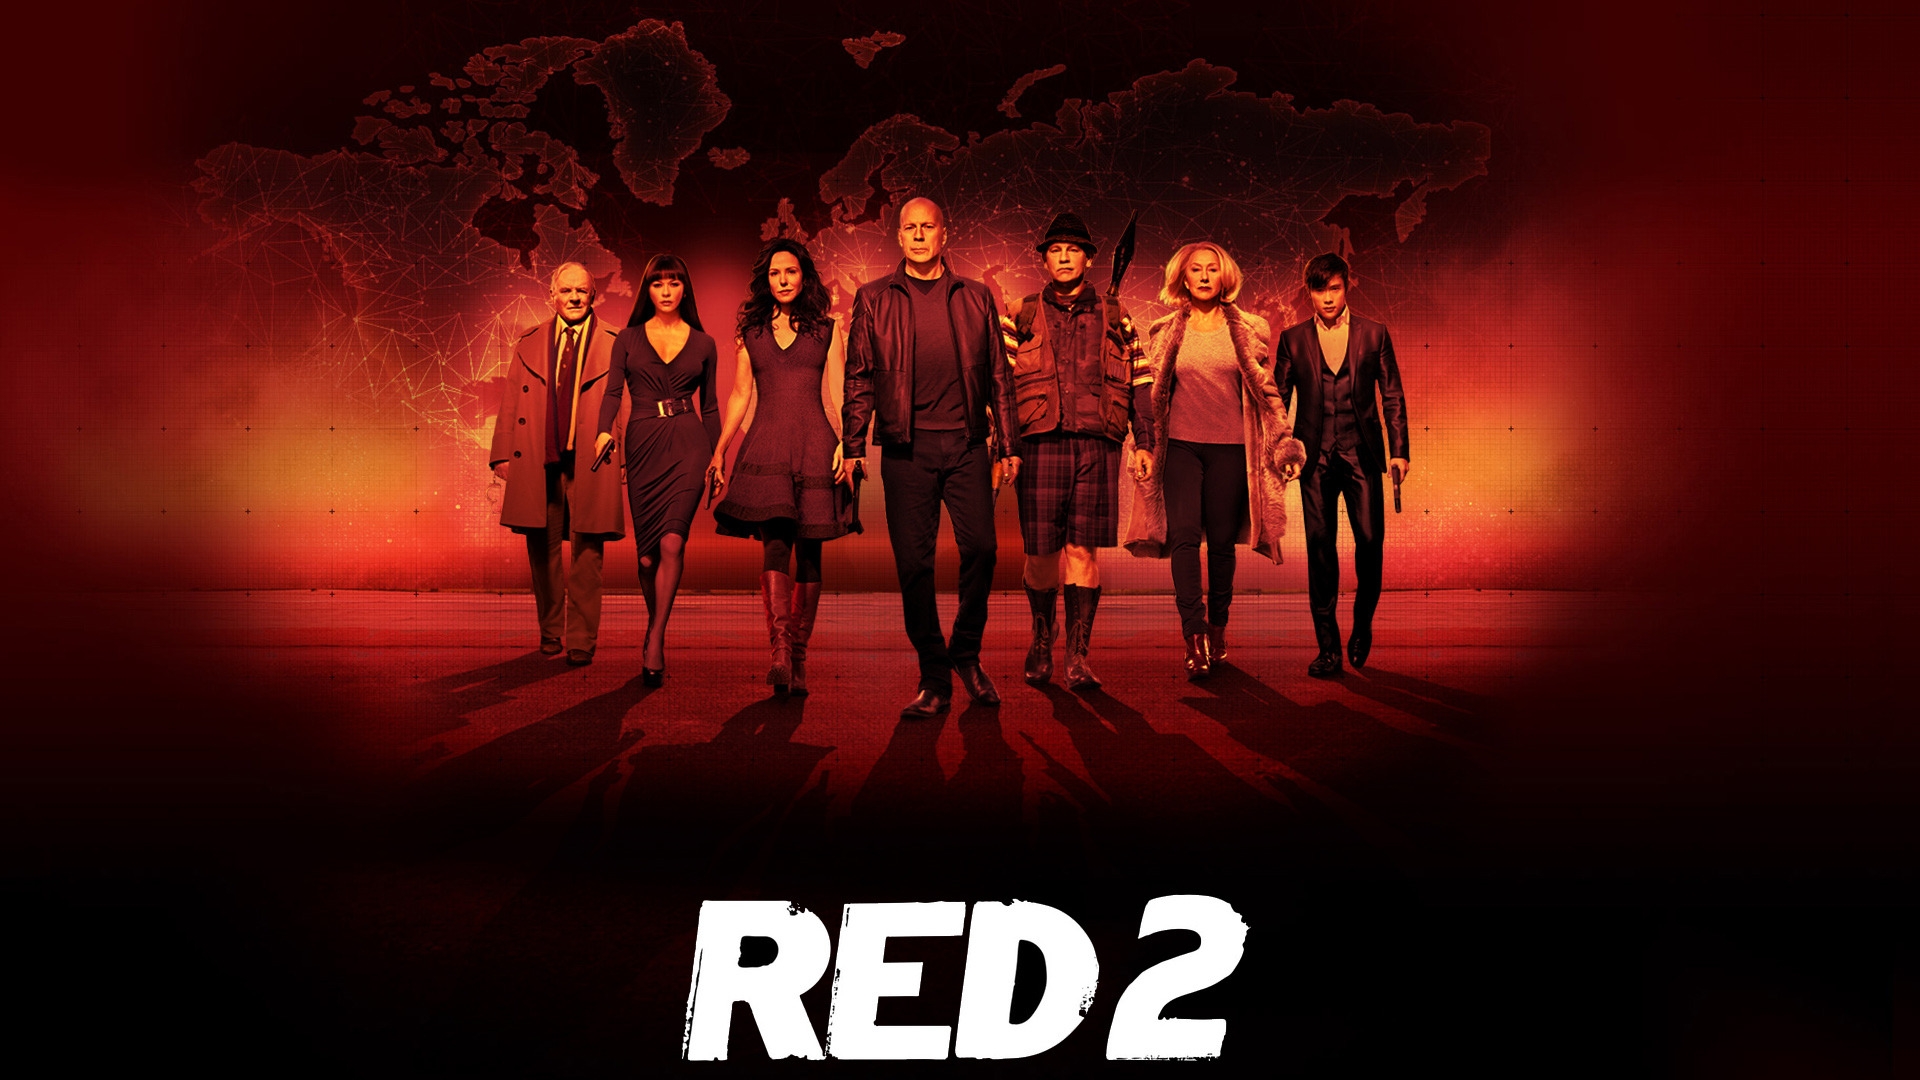 Red 2 Movie for 1920 x 1080 HDTV 1080p resolution